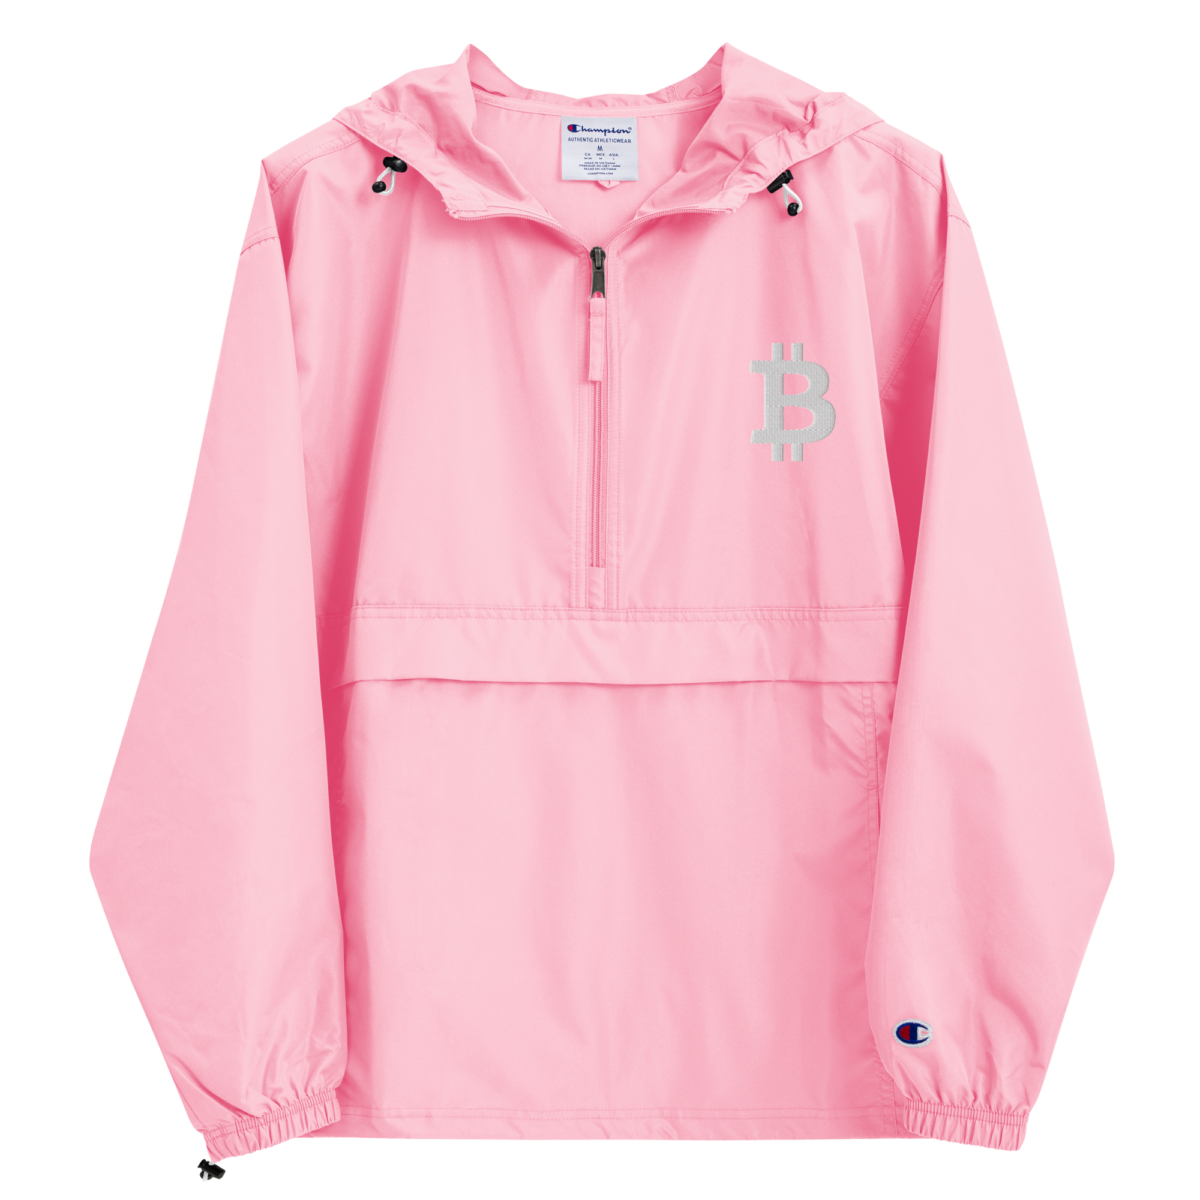 embroidered champion packable jacket pink candy front 631f52b593c11 - Bitcoin Champion Packable Jacket